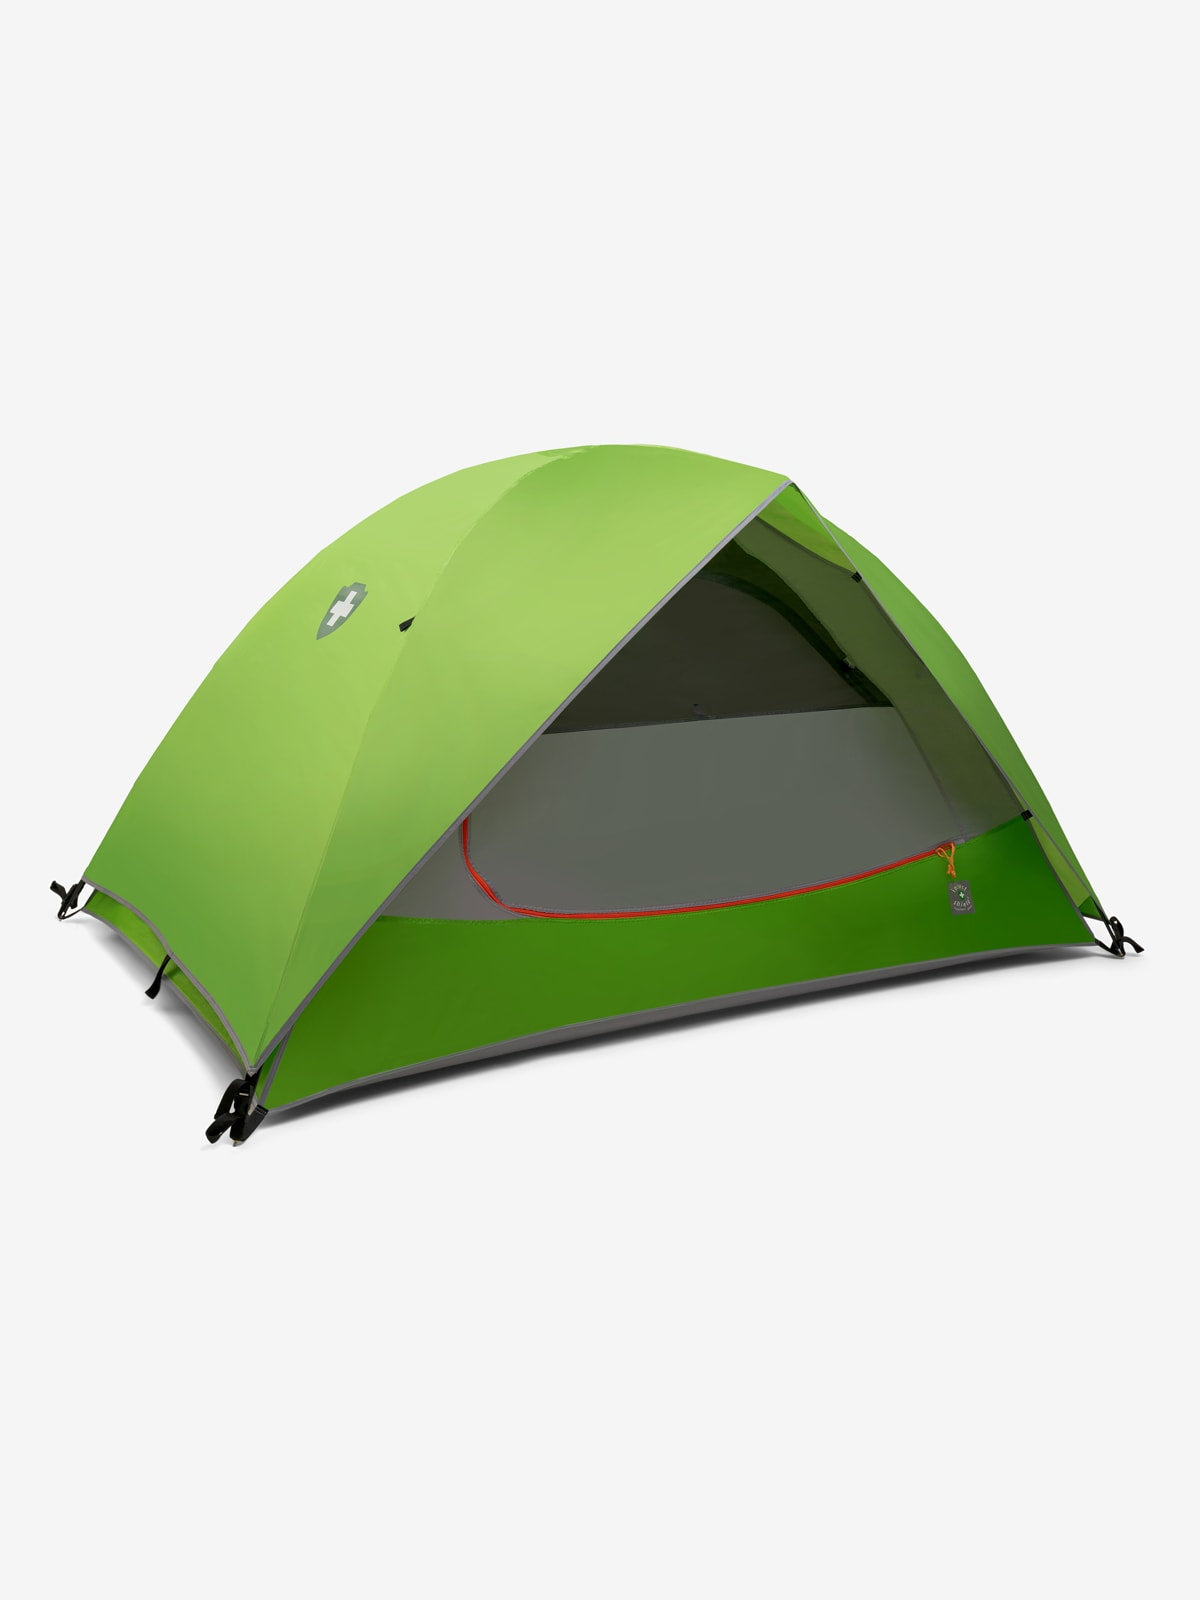 Insect Shield Bug Repellent 2-Person Tent